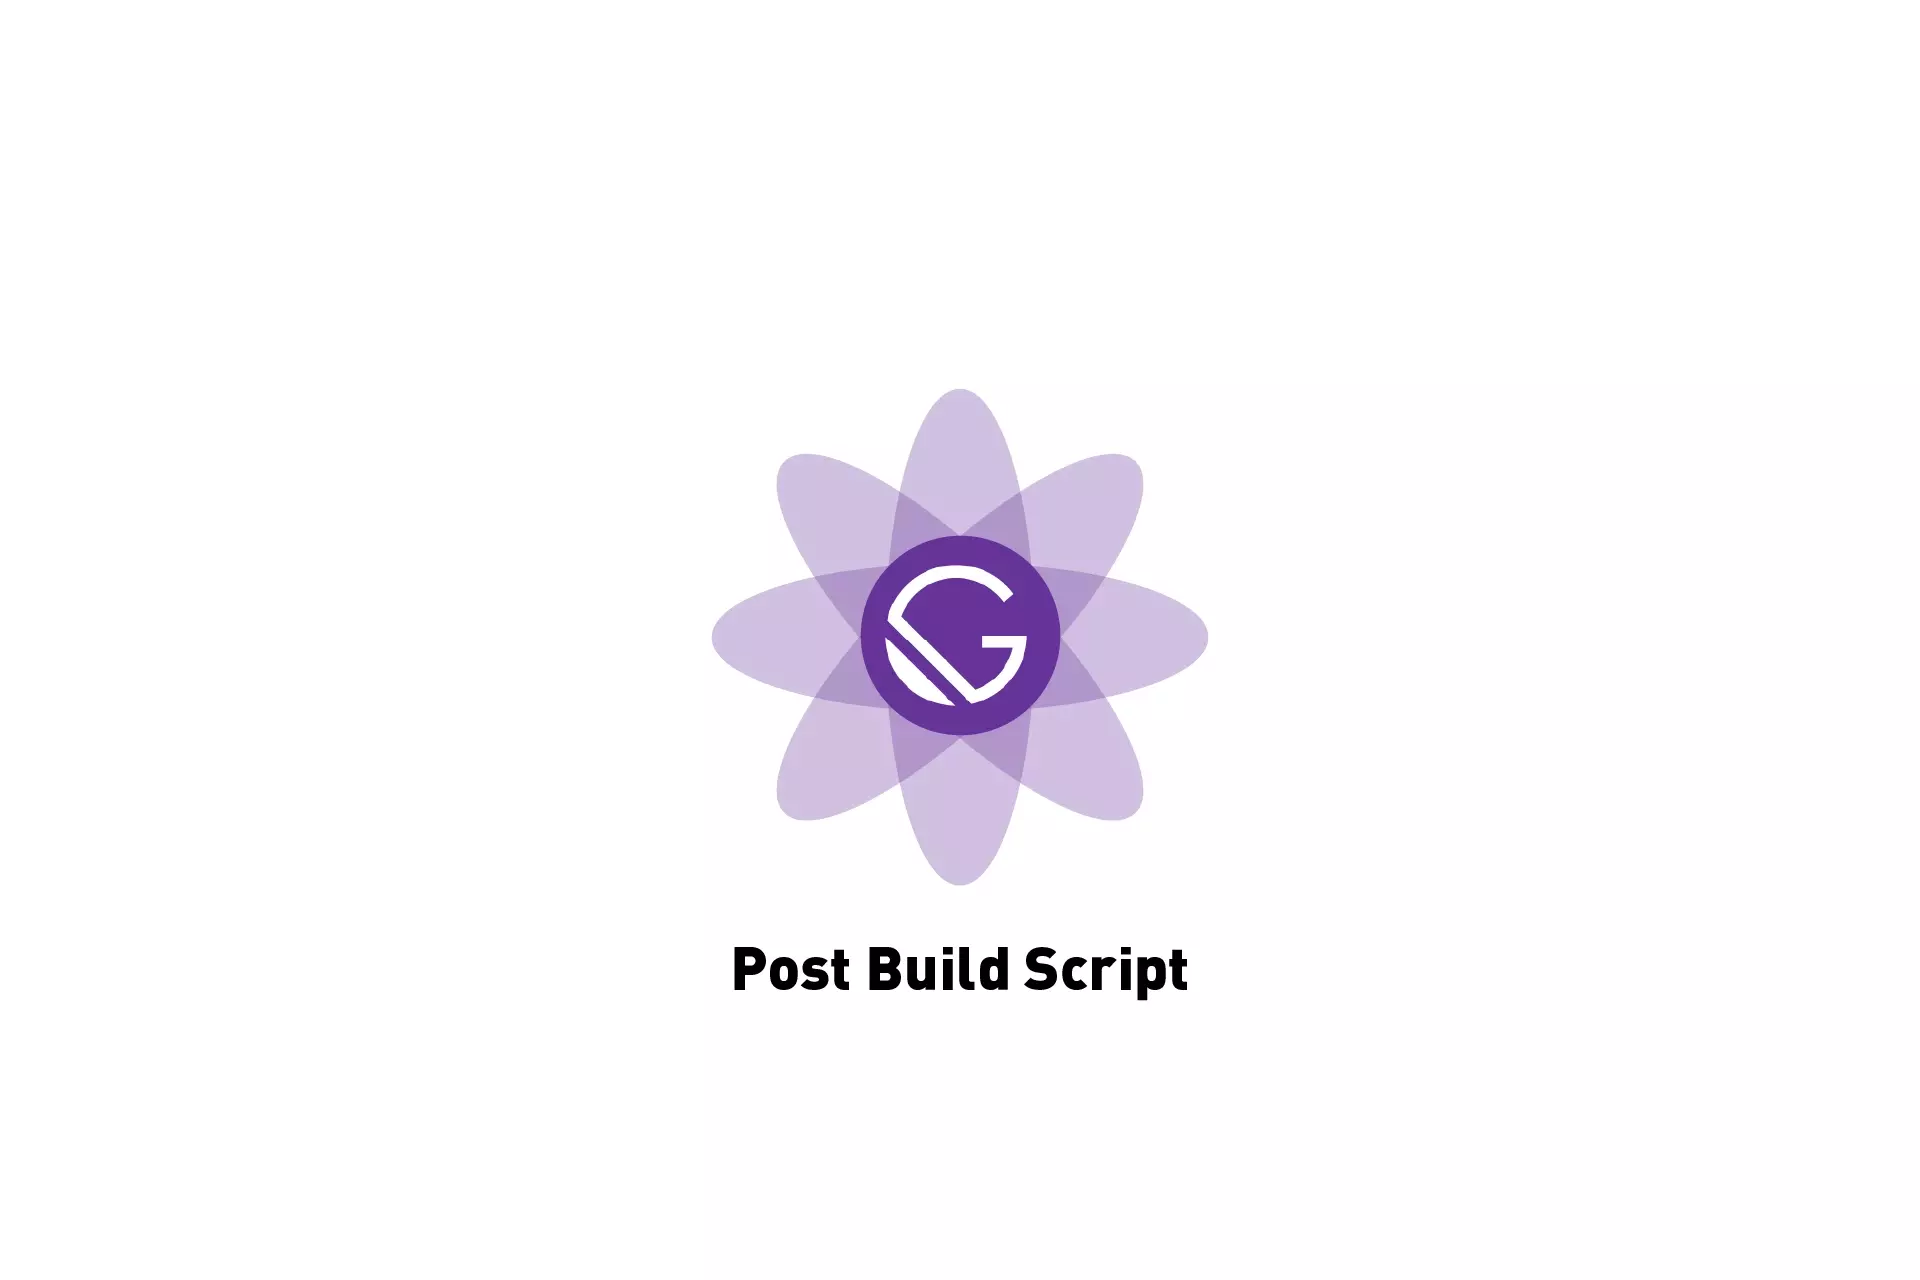 A flower that represents GatsbyJS with the text "Post Build Script" beneath it.